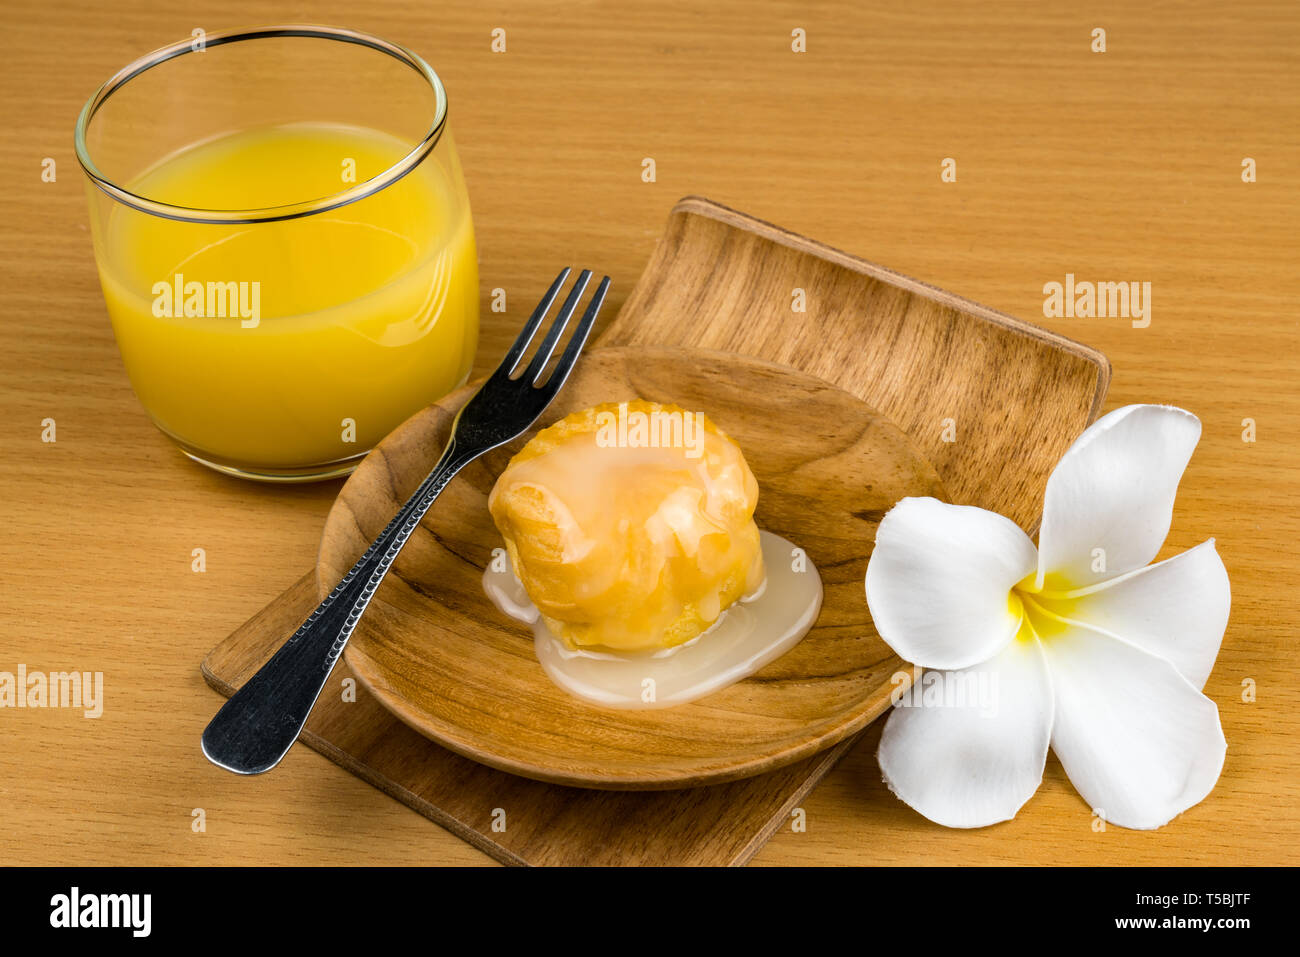 Aclair topped with sweet condensed milk in wooden plate with a glass of passion fruit juice on wooden table Stock Photo